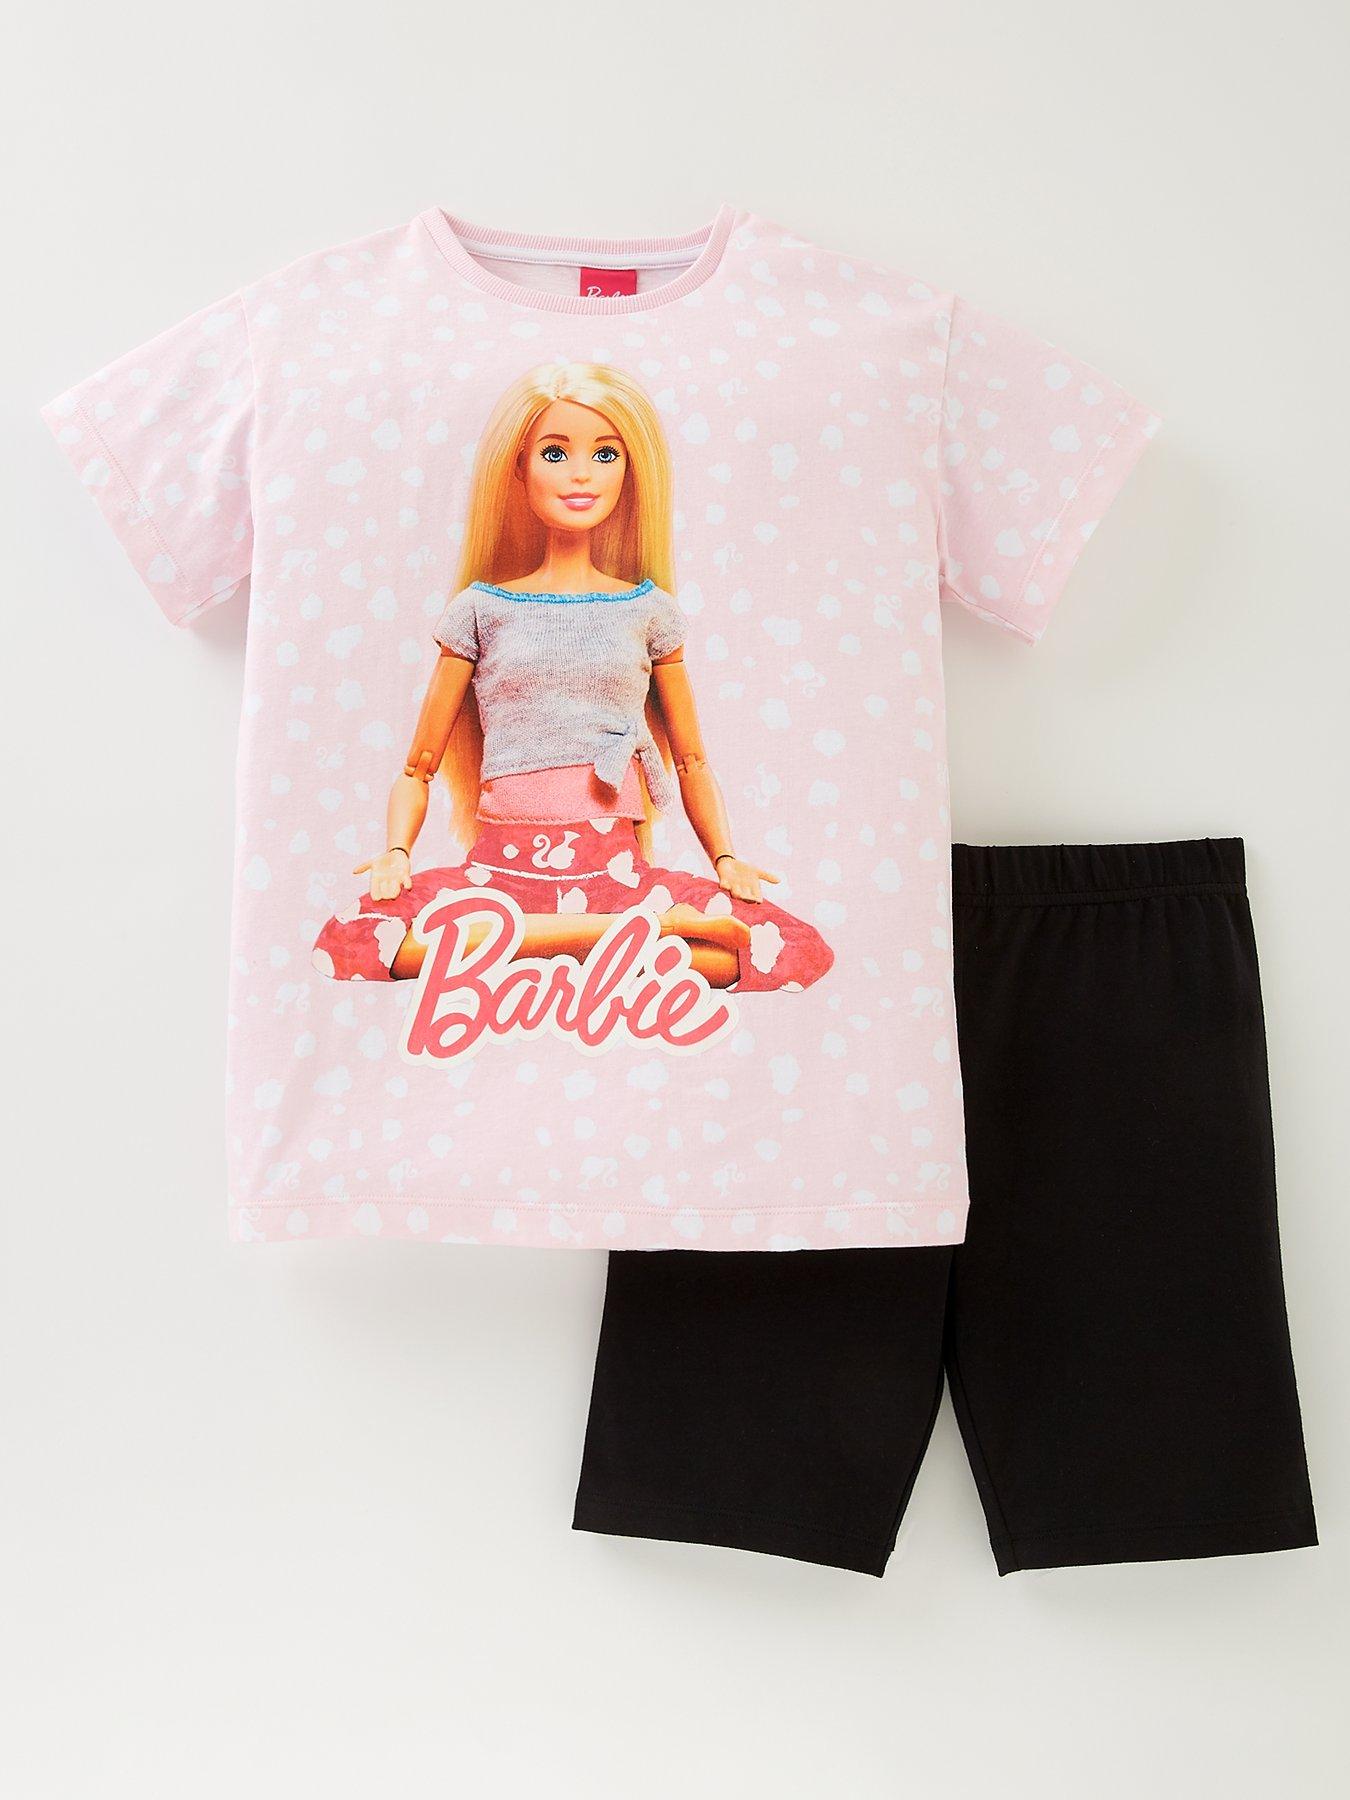 Details about   NEW 2020 Barbie Fashionista Doll "Strong Girls" White T-Shirt Top ~ Clothing